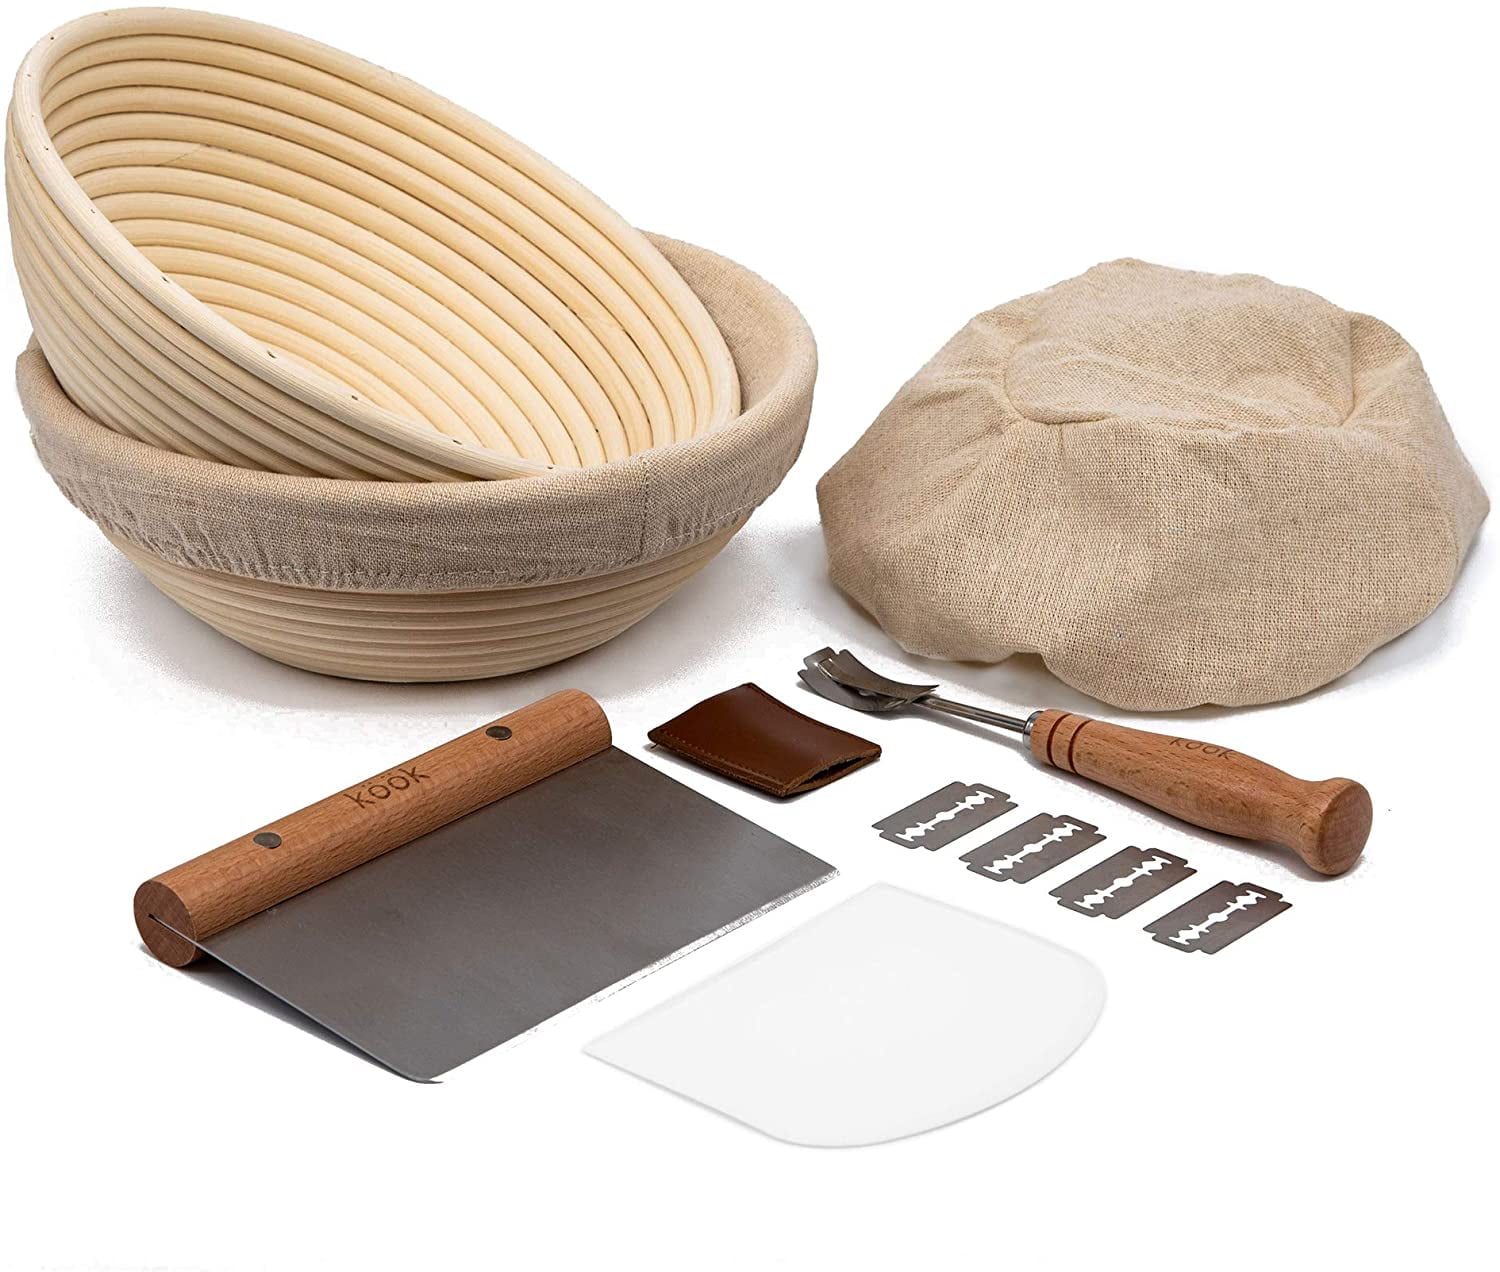 Kook 12 Piece Bread Proofing Set, with 2 Baskets